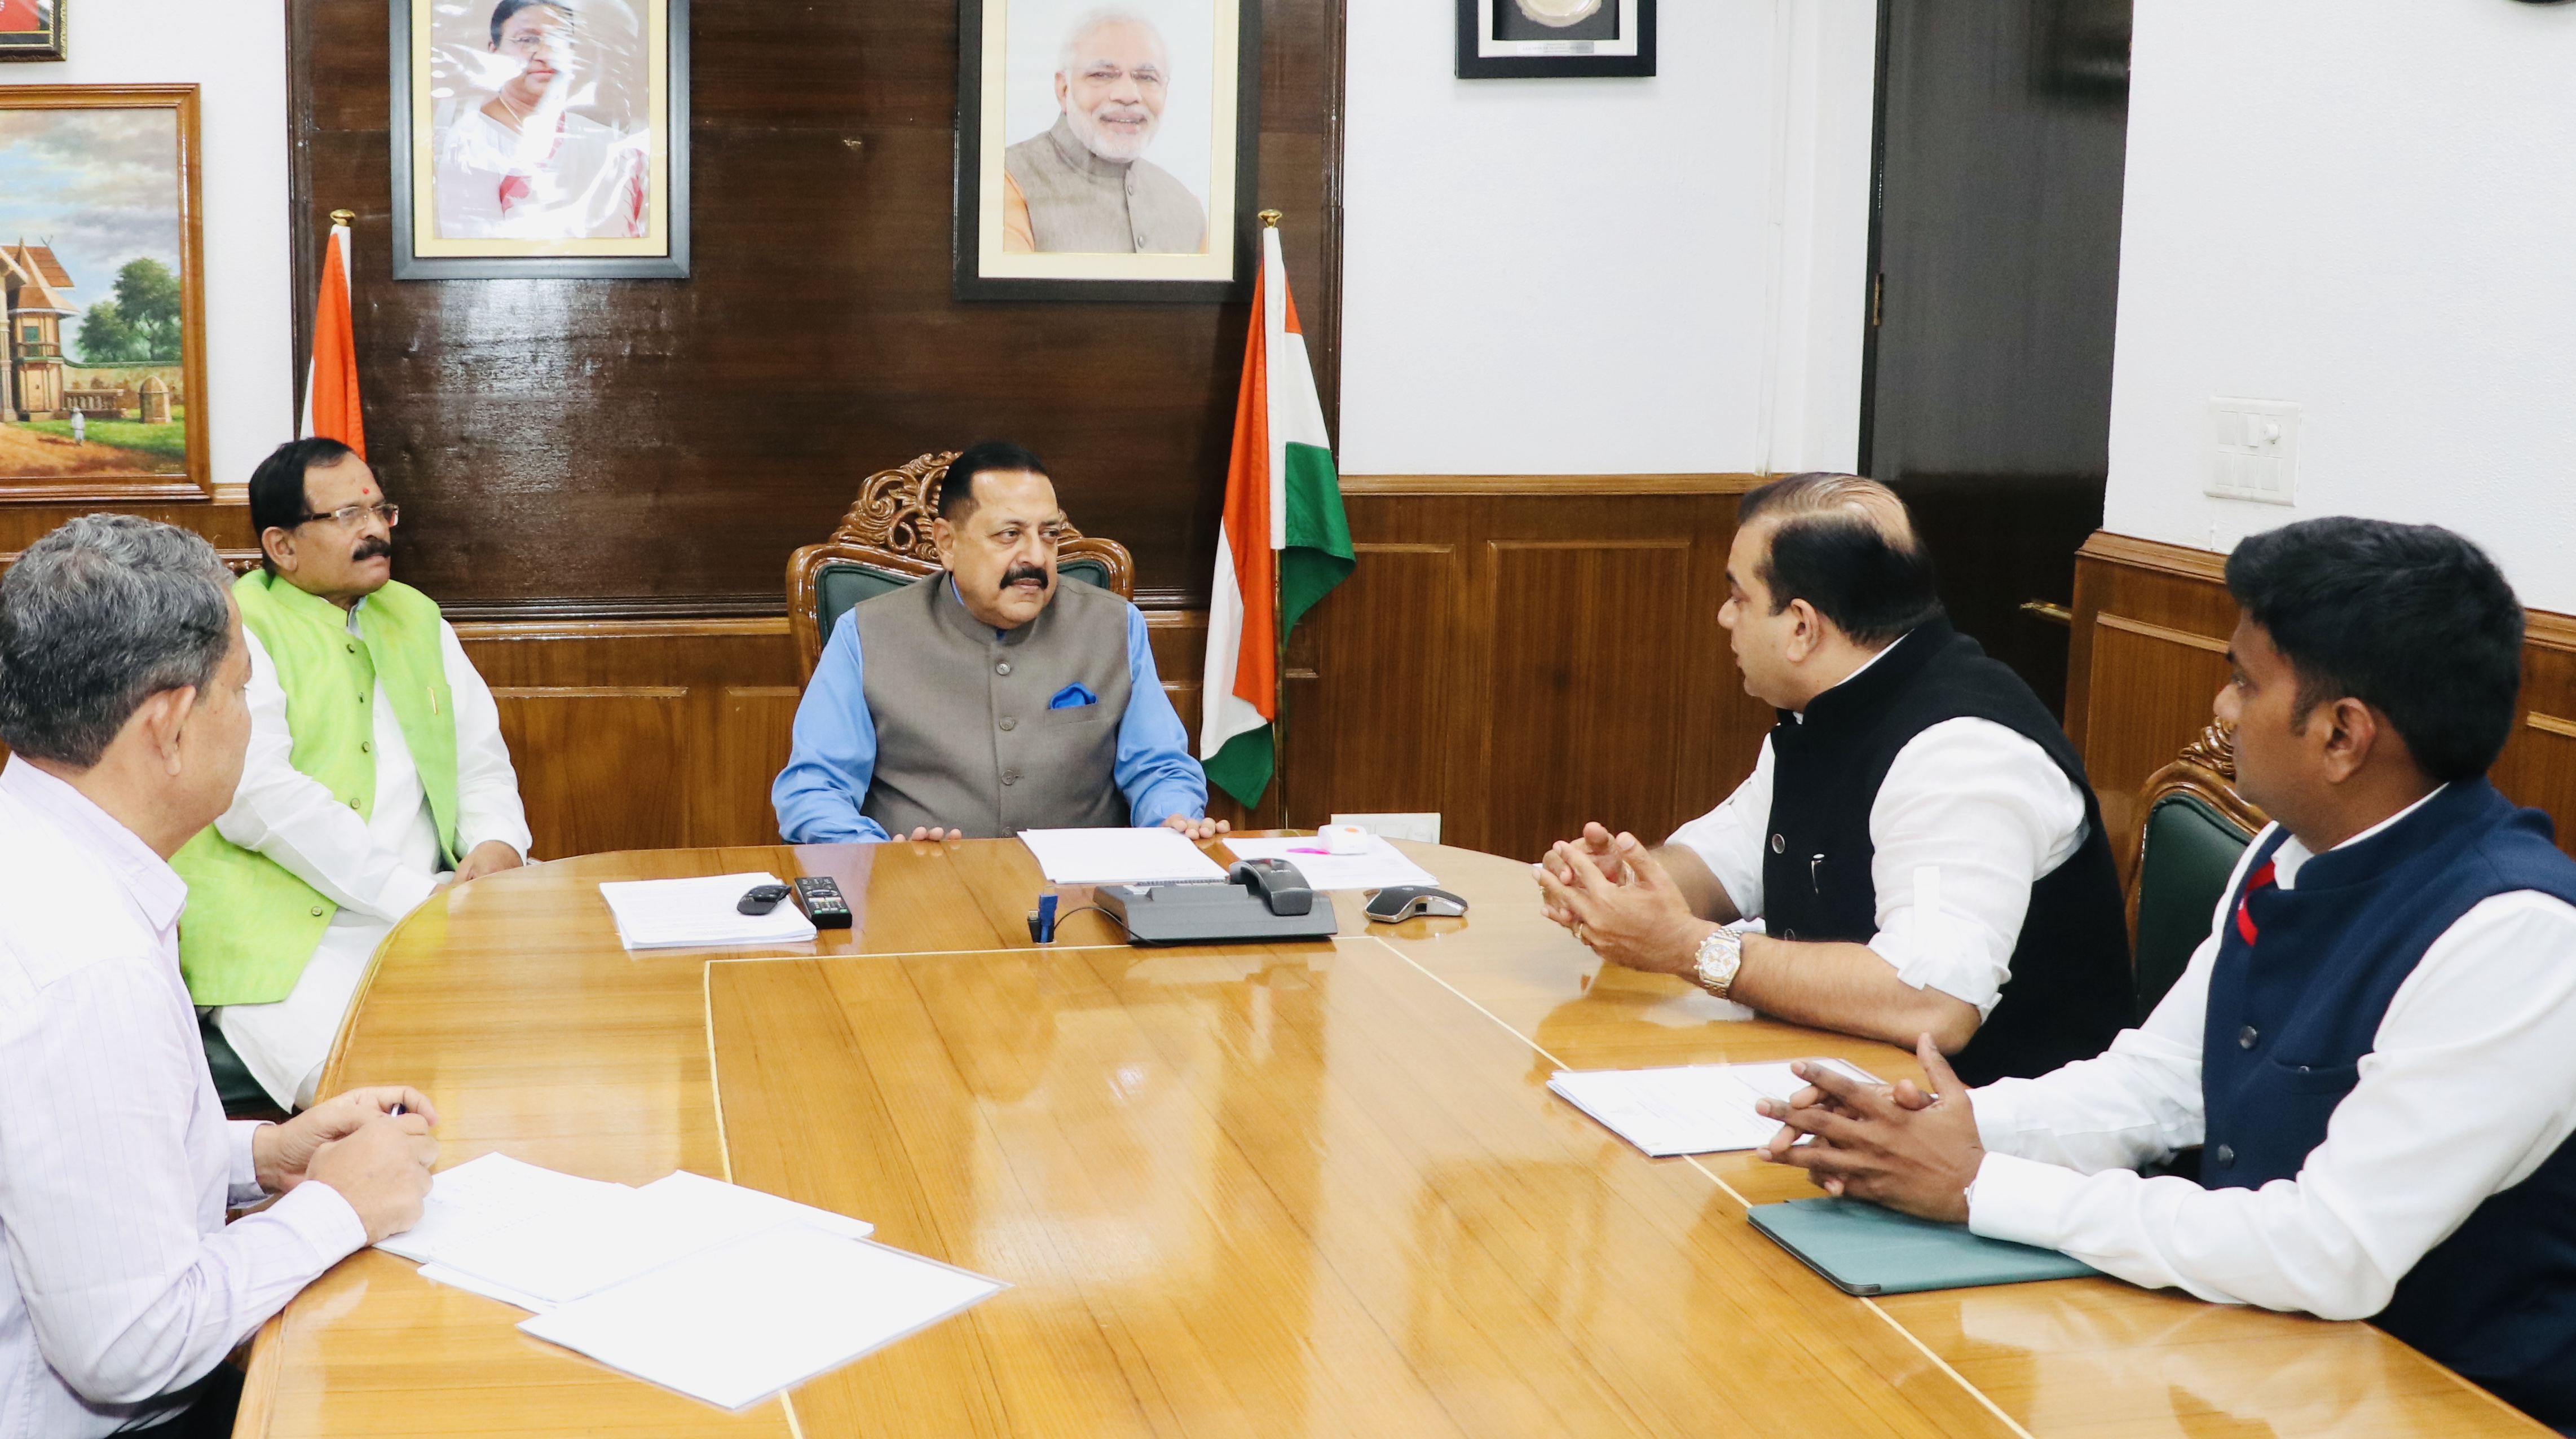 Goa Ministerial delegation led by Union Minister, Shri Shripad Yesso Naik and State Tourism Minister, Shri Rohan Khaunte along with other senior officials called on Union Minister Dr. Jitendra Singh at New Delhi.